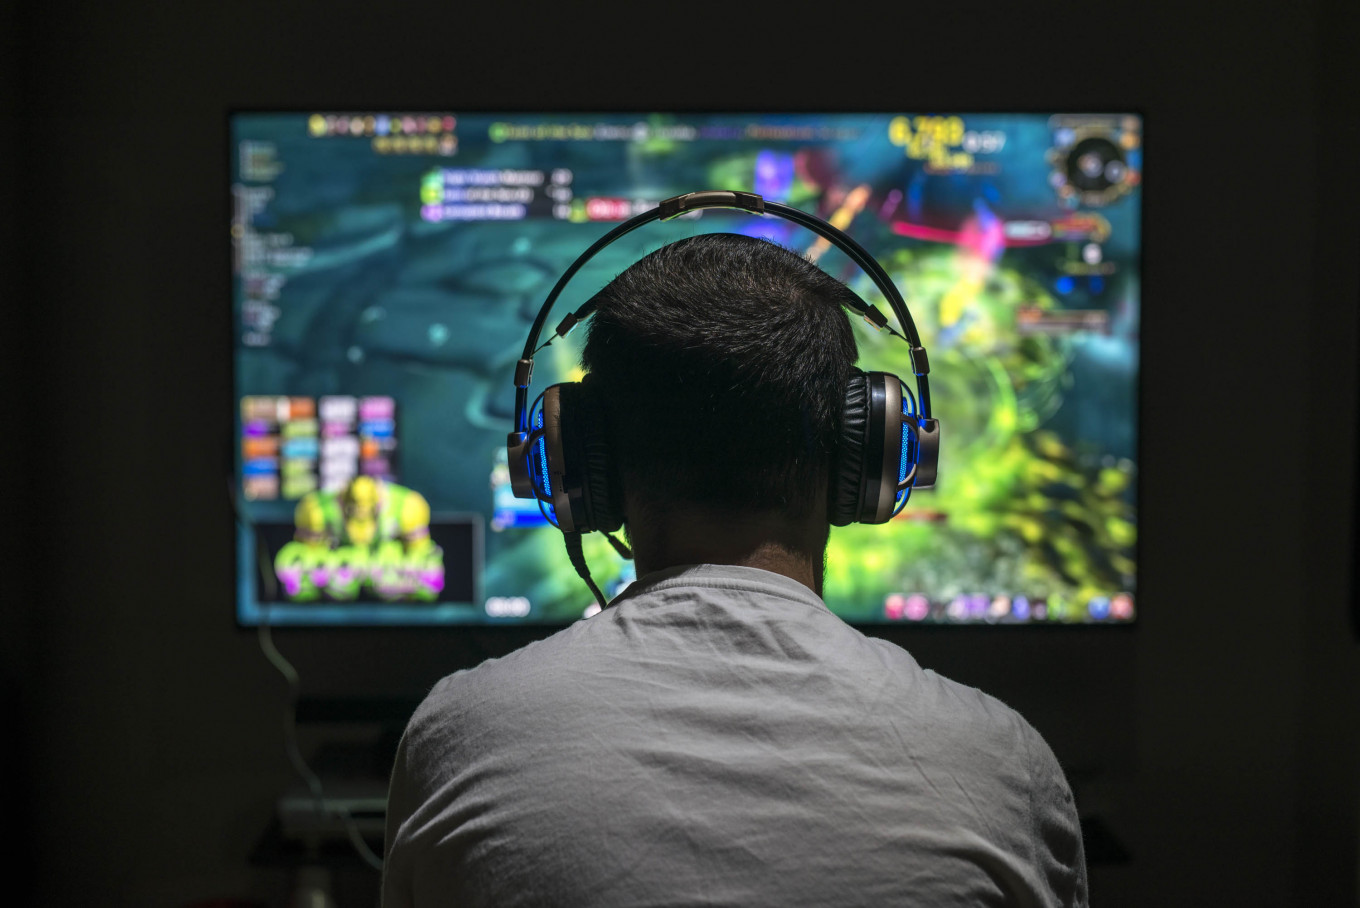 Platforms, gadgets cater to gamers' increased activities during COVID-19 - Thu, July 30 2020 - The Jakarta Post